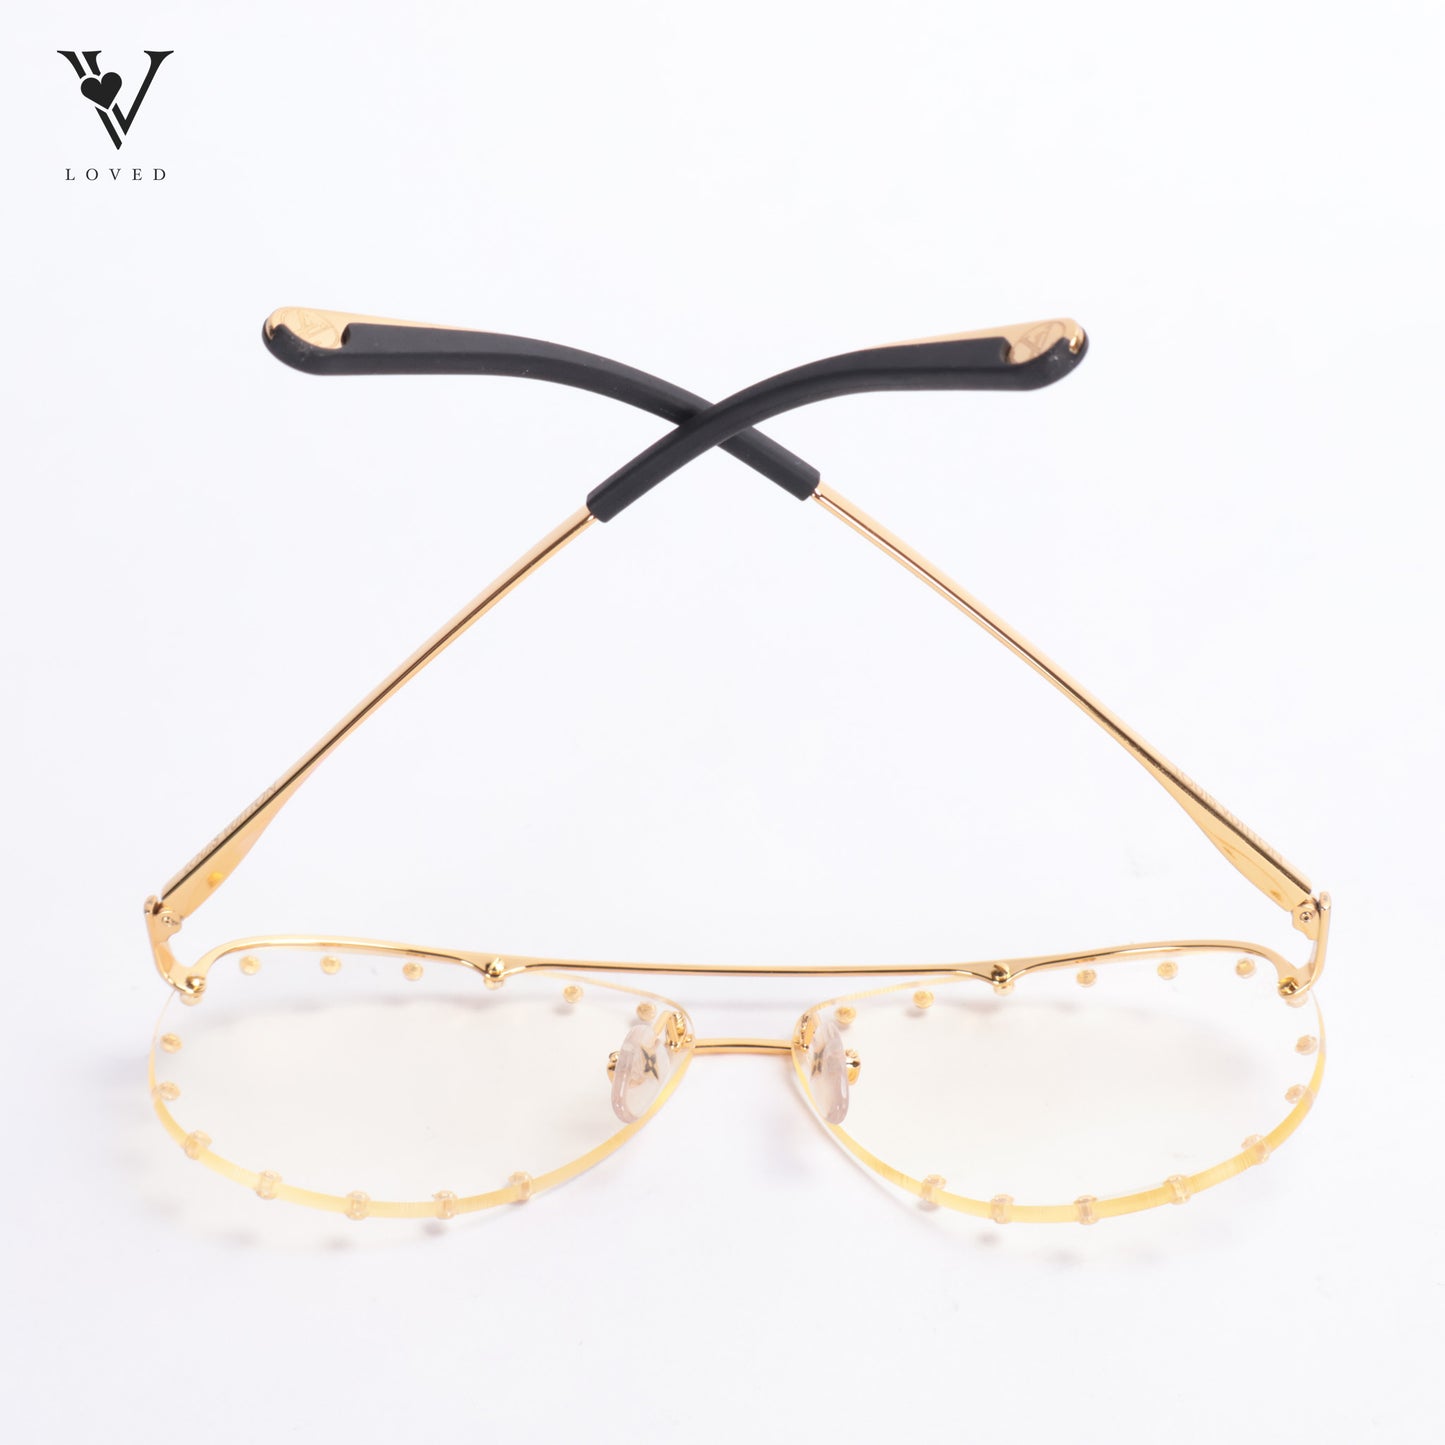 The Party Eyeglasses